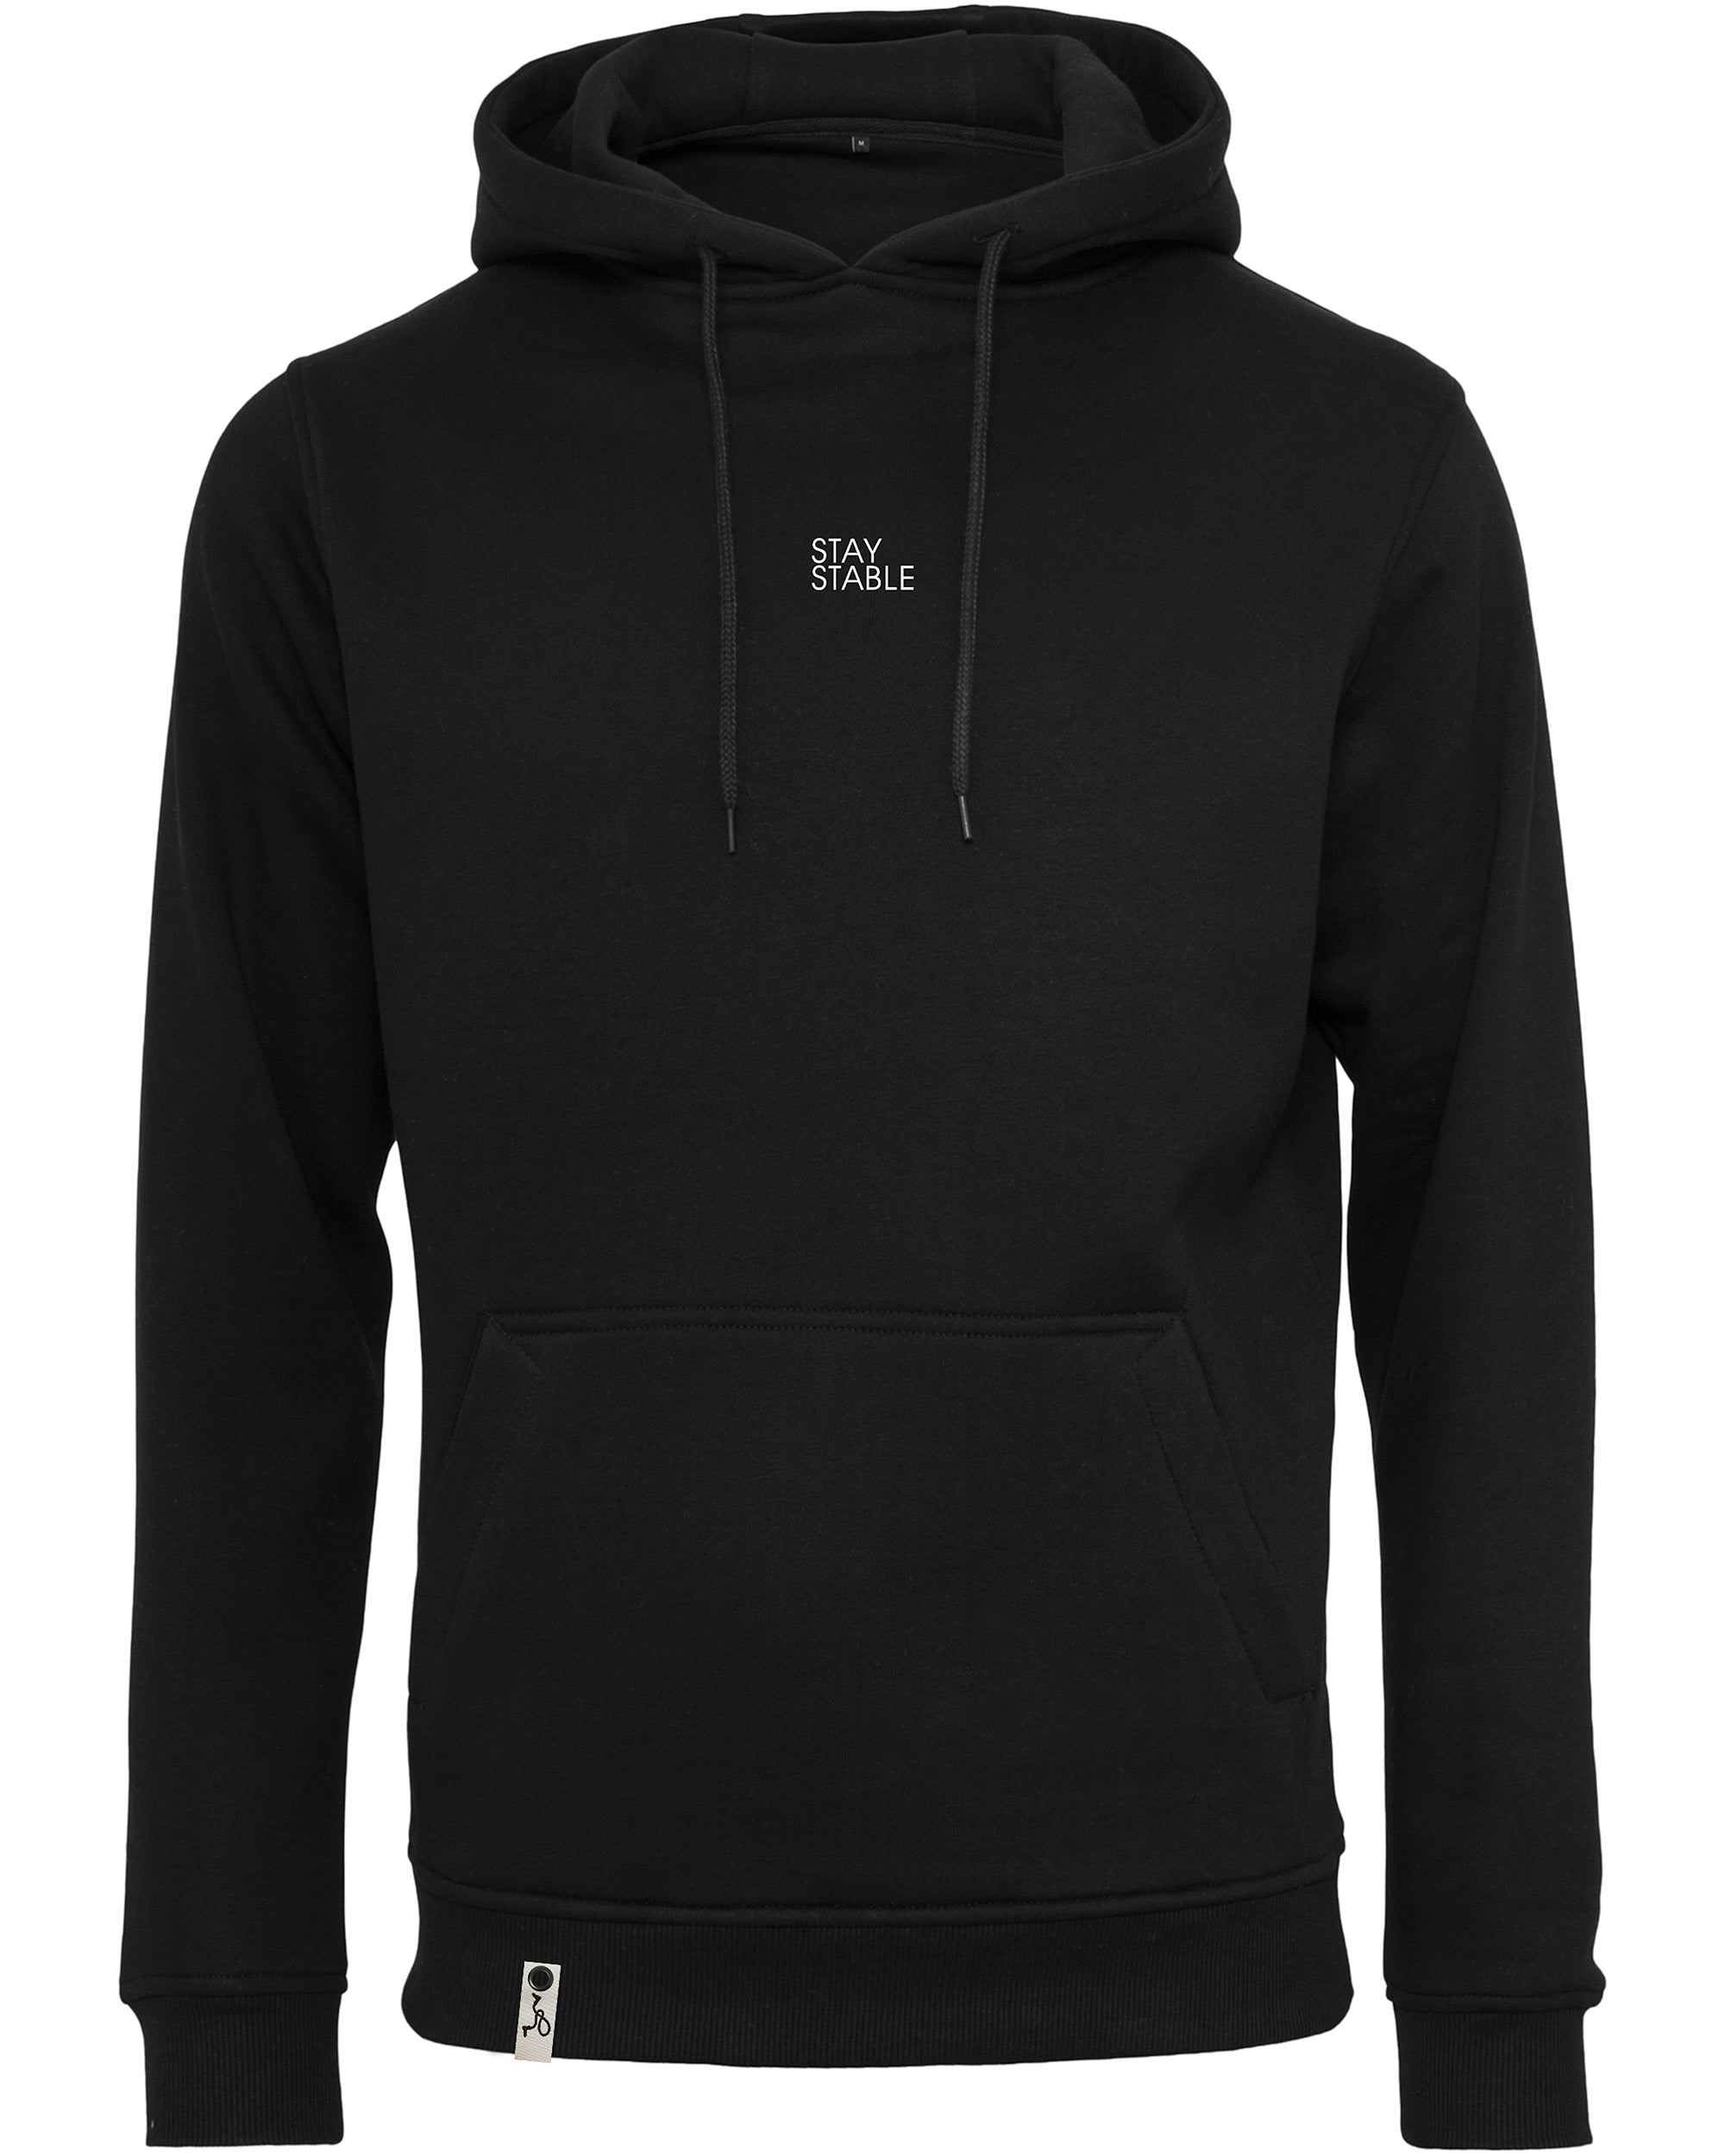 Unisex Heavy Hoody - Stay Stable